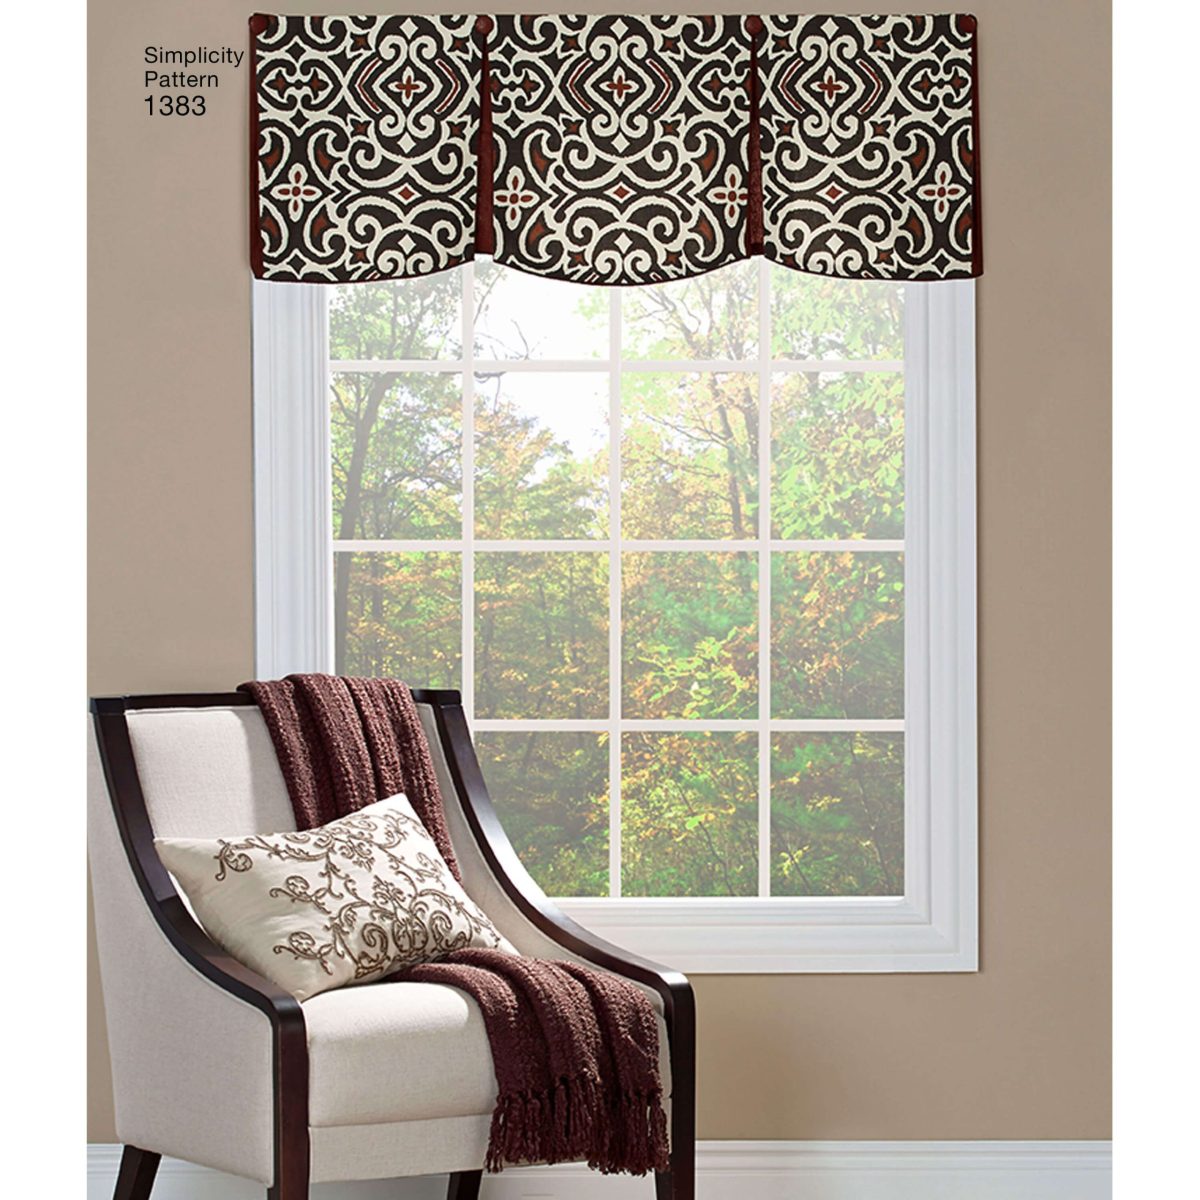 Simplicity Sewing Pattern 1383 Valances for 36" to 40" Wide Windows